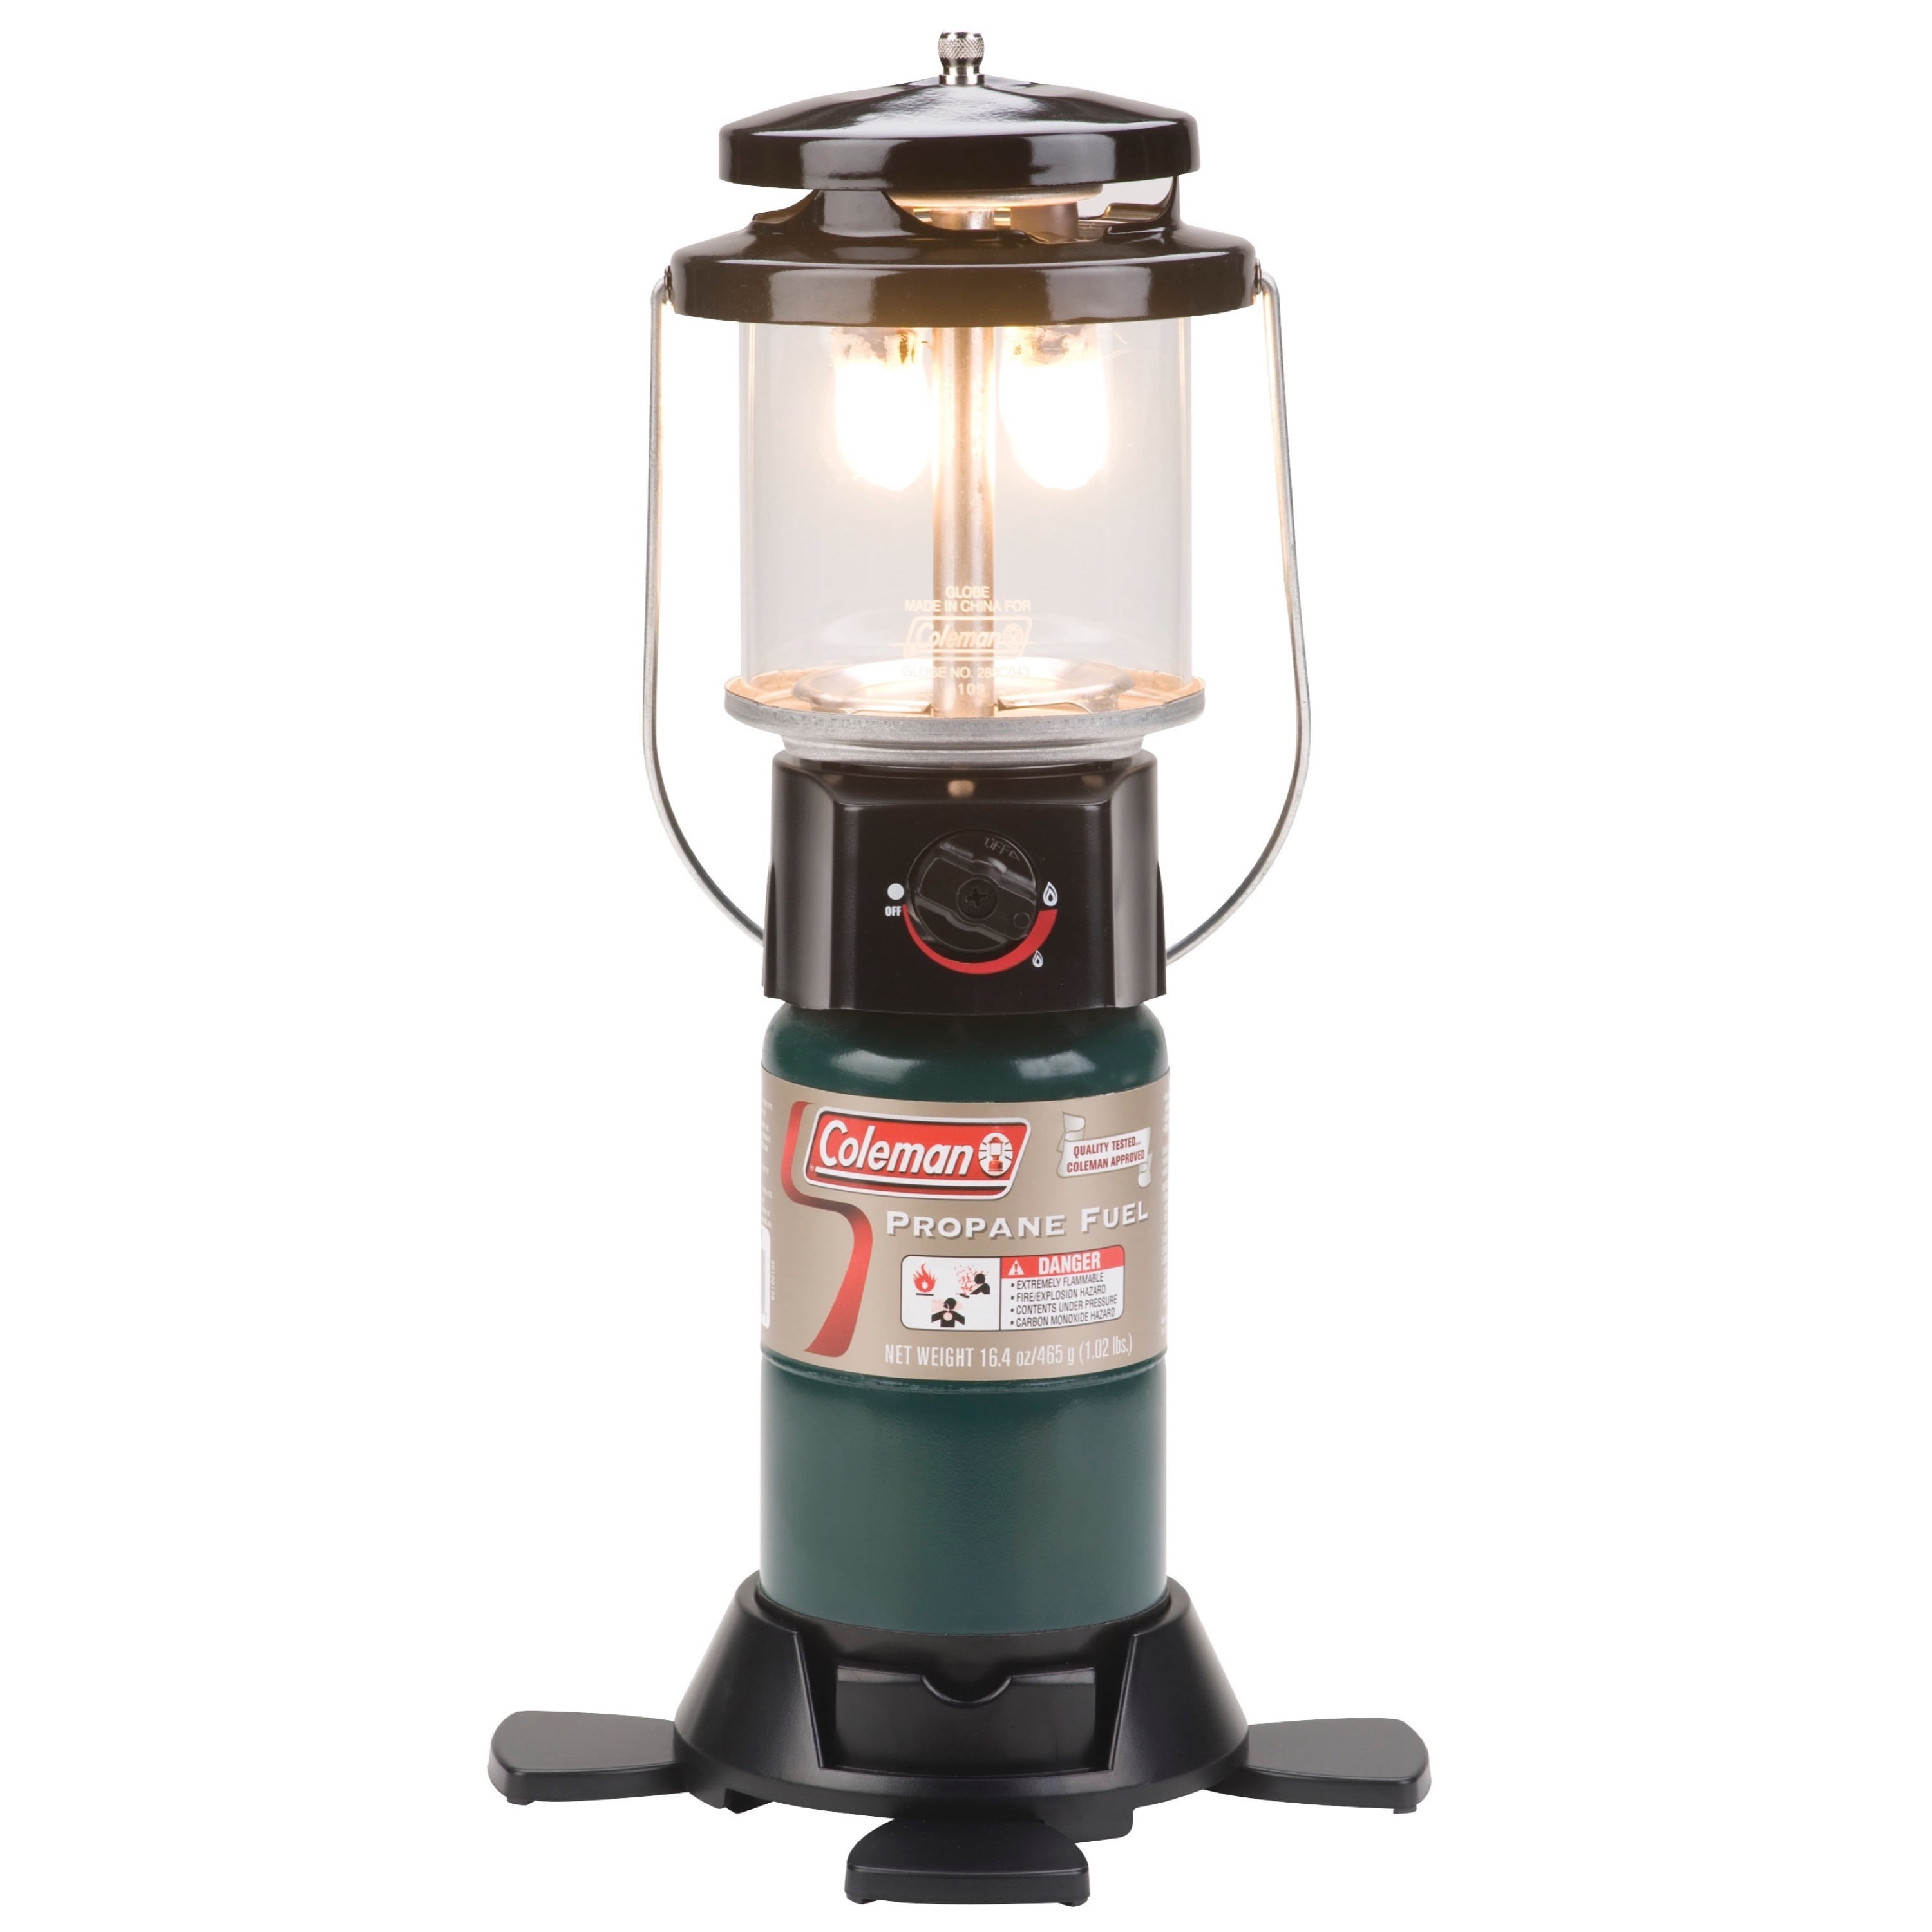 Deluxe Perfect Flow Gas Lantern for Camping and Outdoor Use Coleman Propane Lantern 